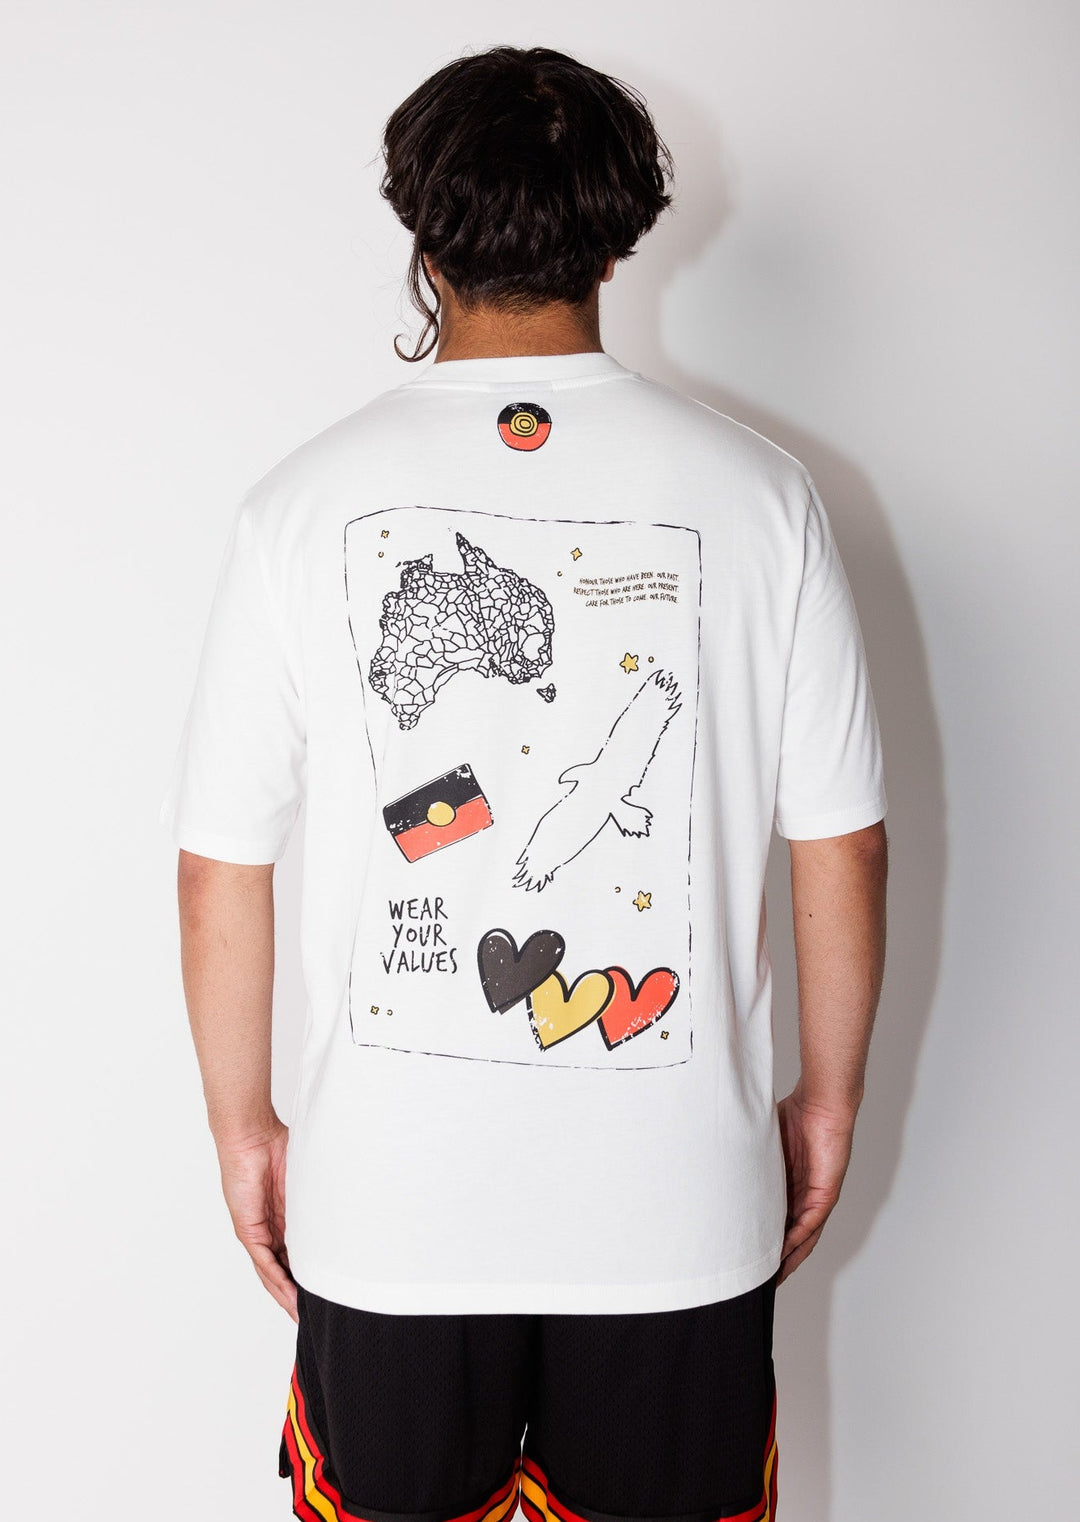 Clothing The Gaps. Icon Spirit Tee. White T-shirt with 'Clothing The Gaps' in a black, yellow, red handwritten text small on front of t-shirt in left pocket area. Back of tee features prominent Aboriginal symbols of resistance and culture, including the Aboriginal flag, a black outlined decolonised map of “Australia,” outlined black Bunjil, 3 black, yellow and red hearts and black handwritten text 'wear your values'